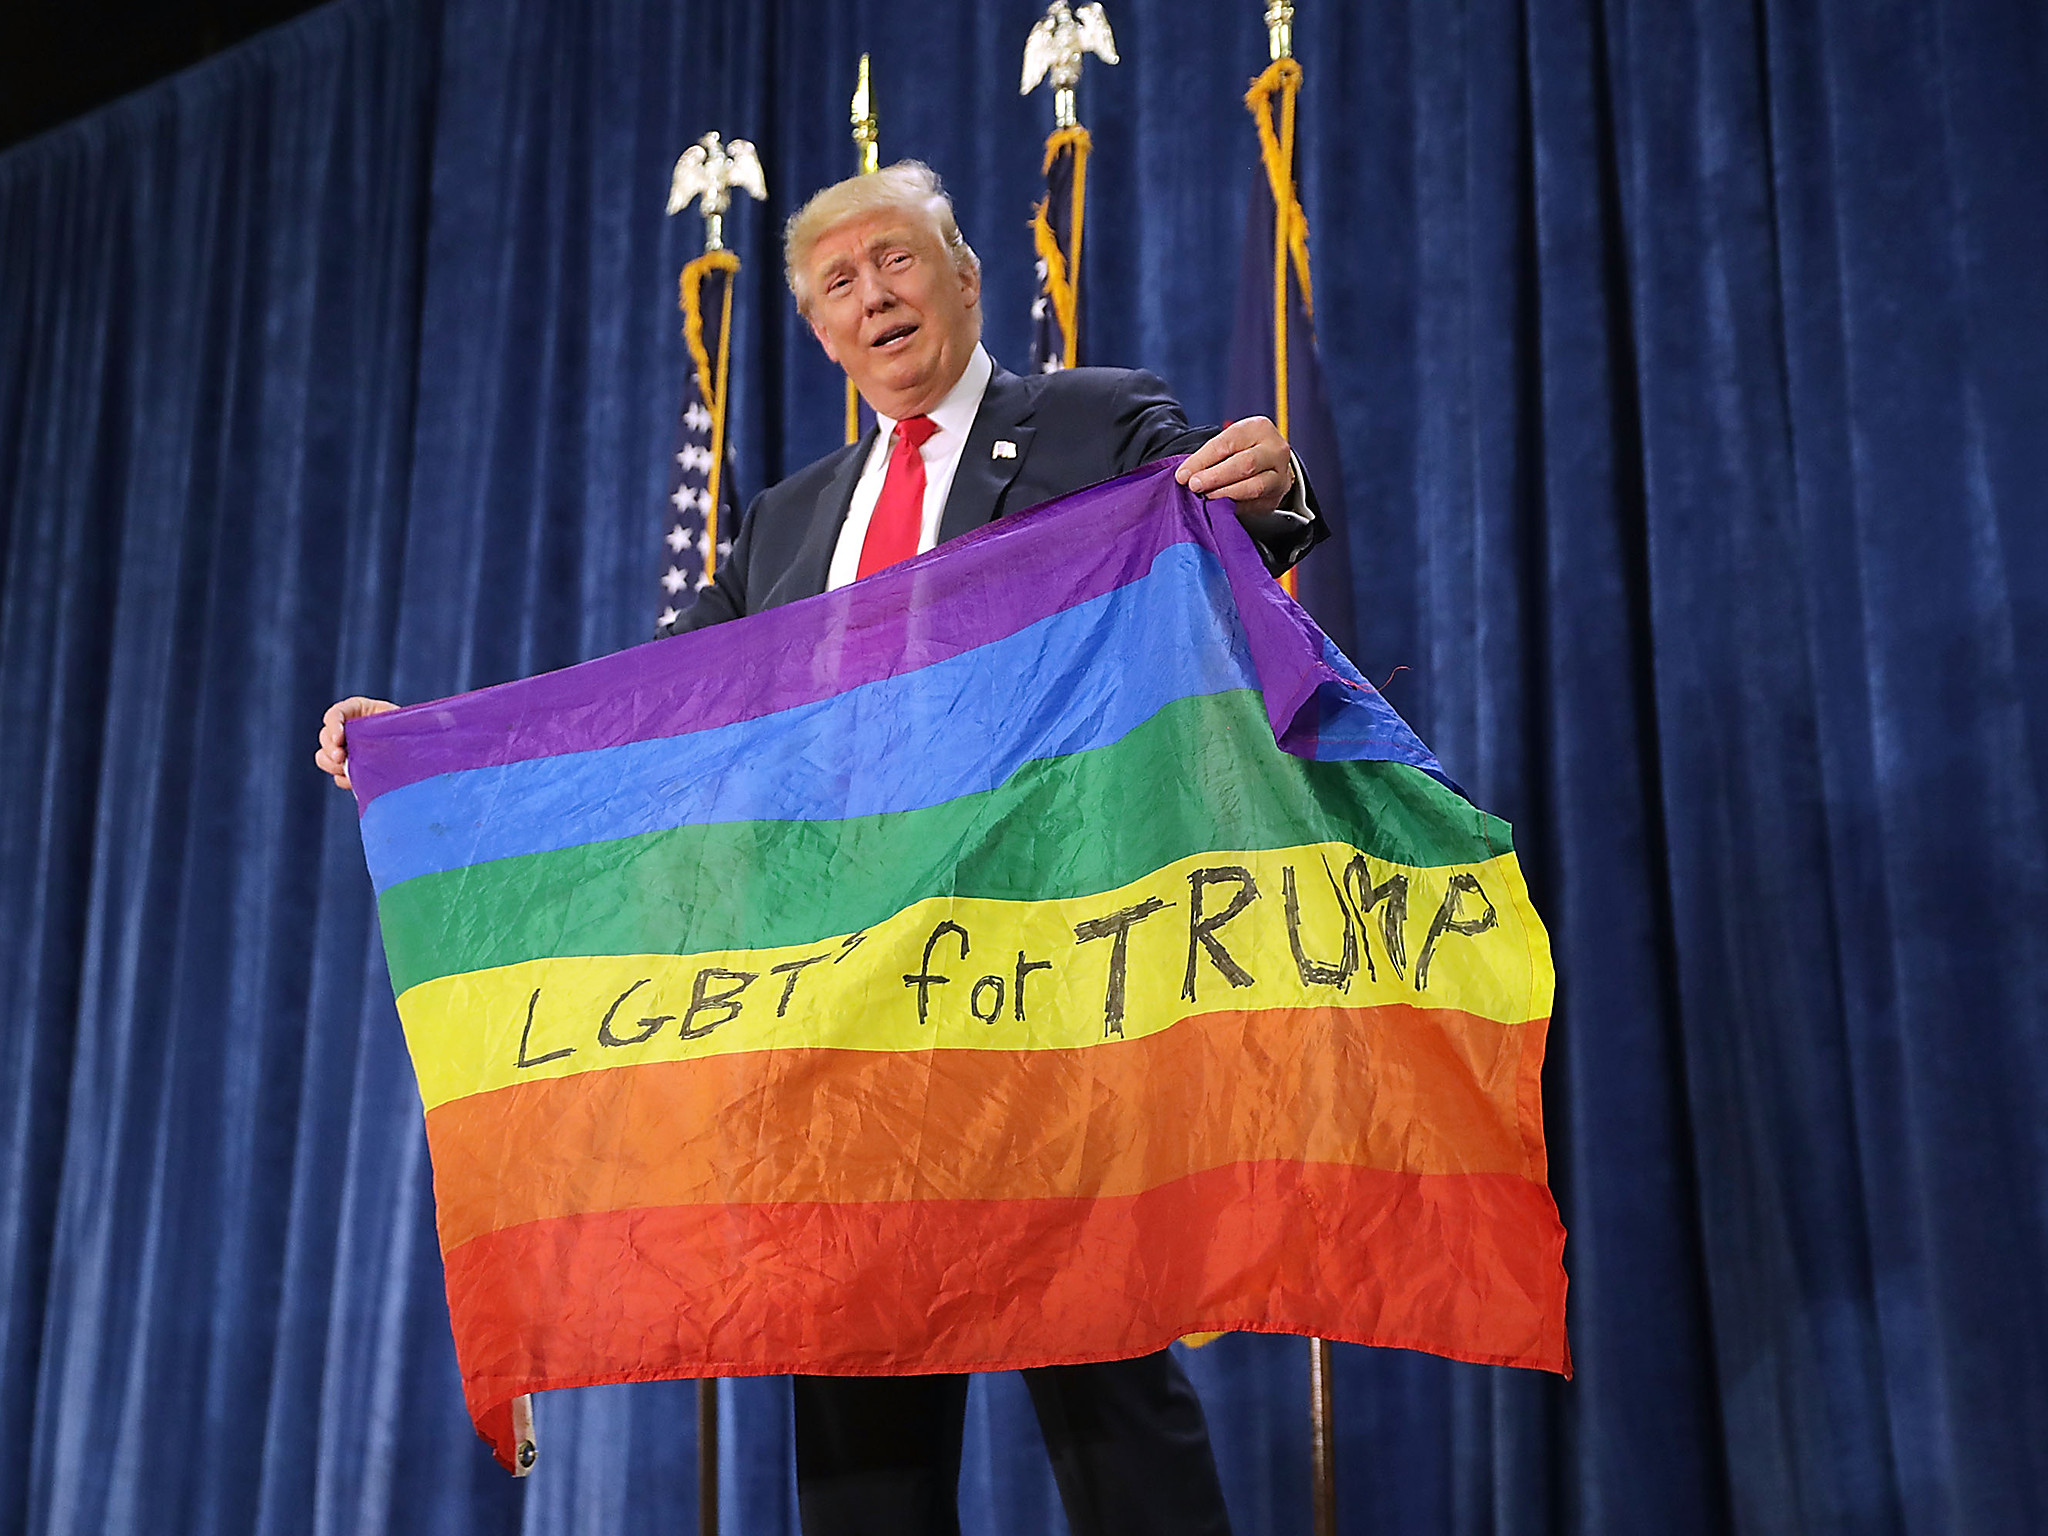 Donald Trumps running mate thought HIV funding could be better spent on gay conversion therapy time to put the rainbow flag down The Independent